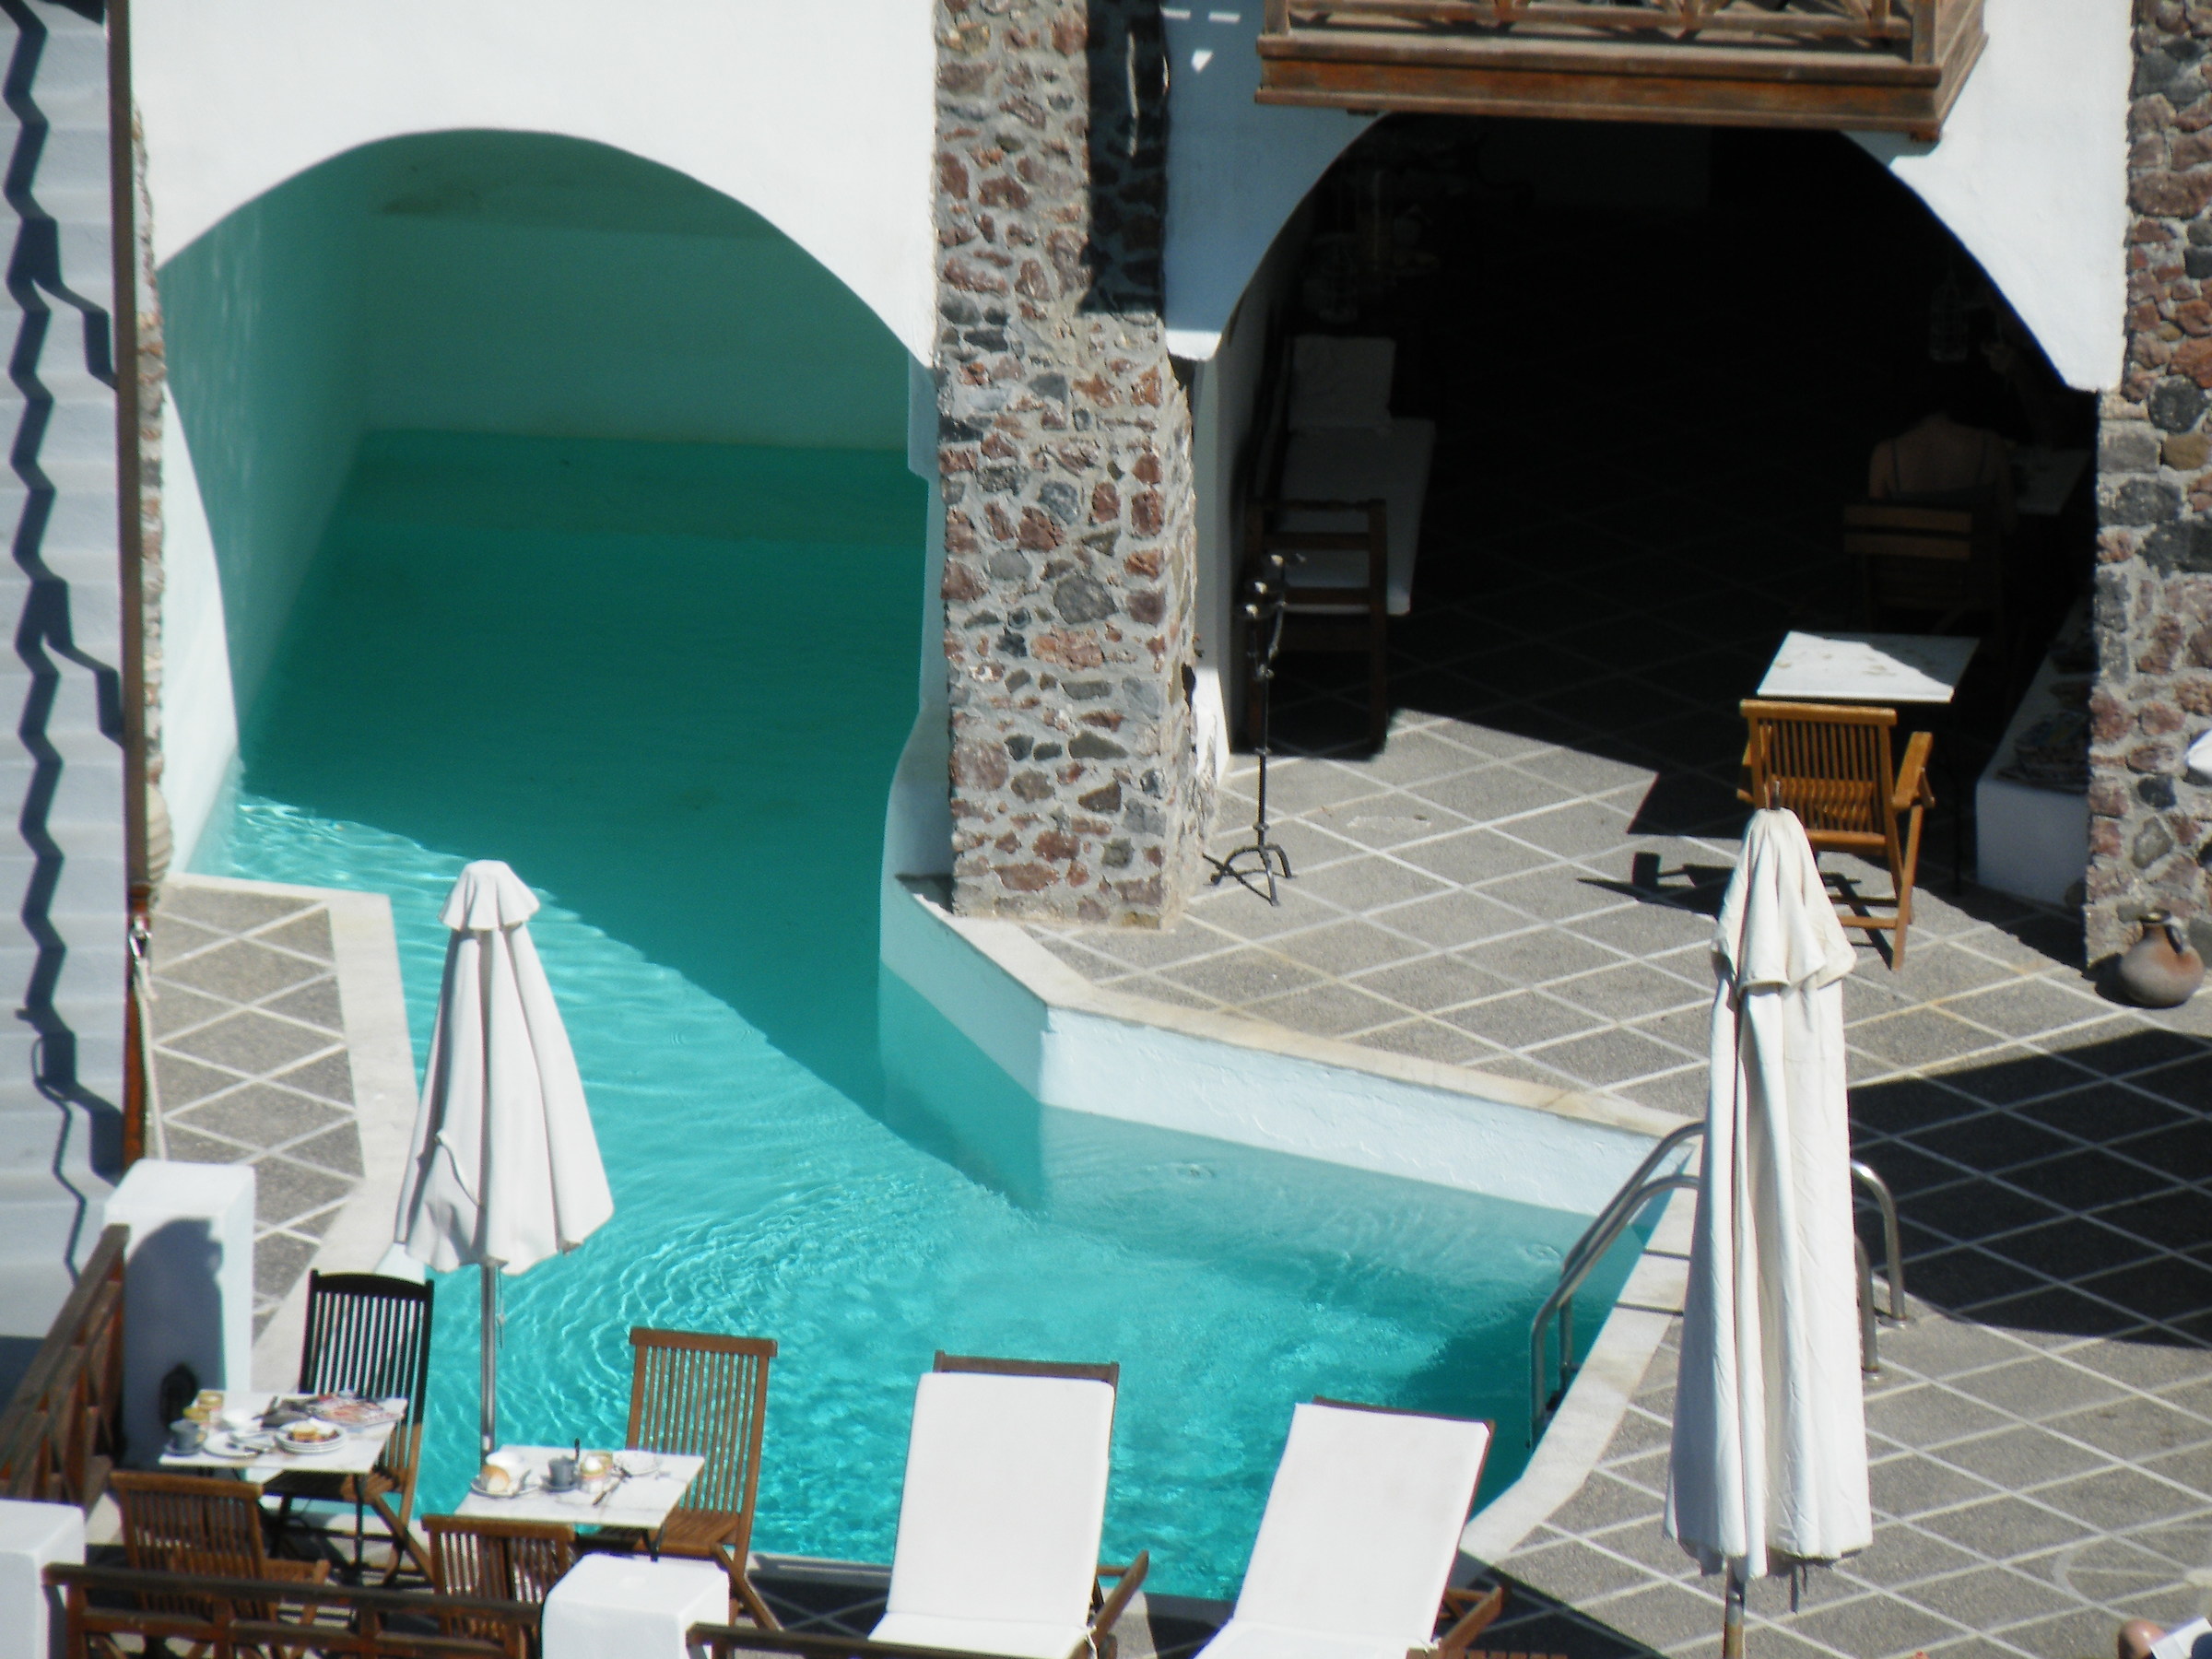 Oia-pool under the house...